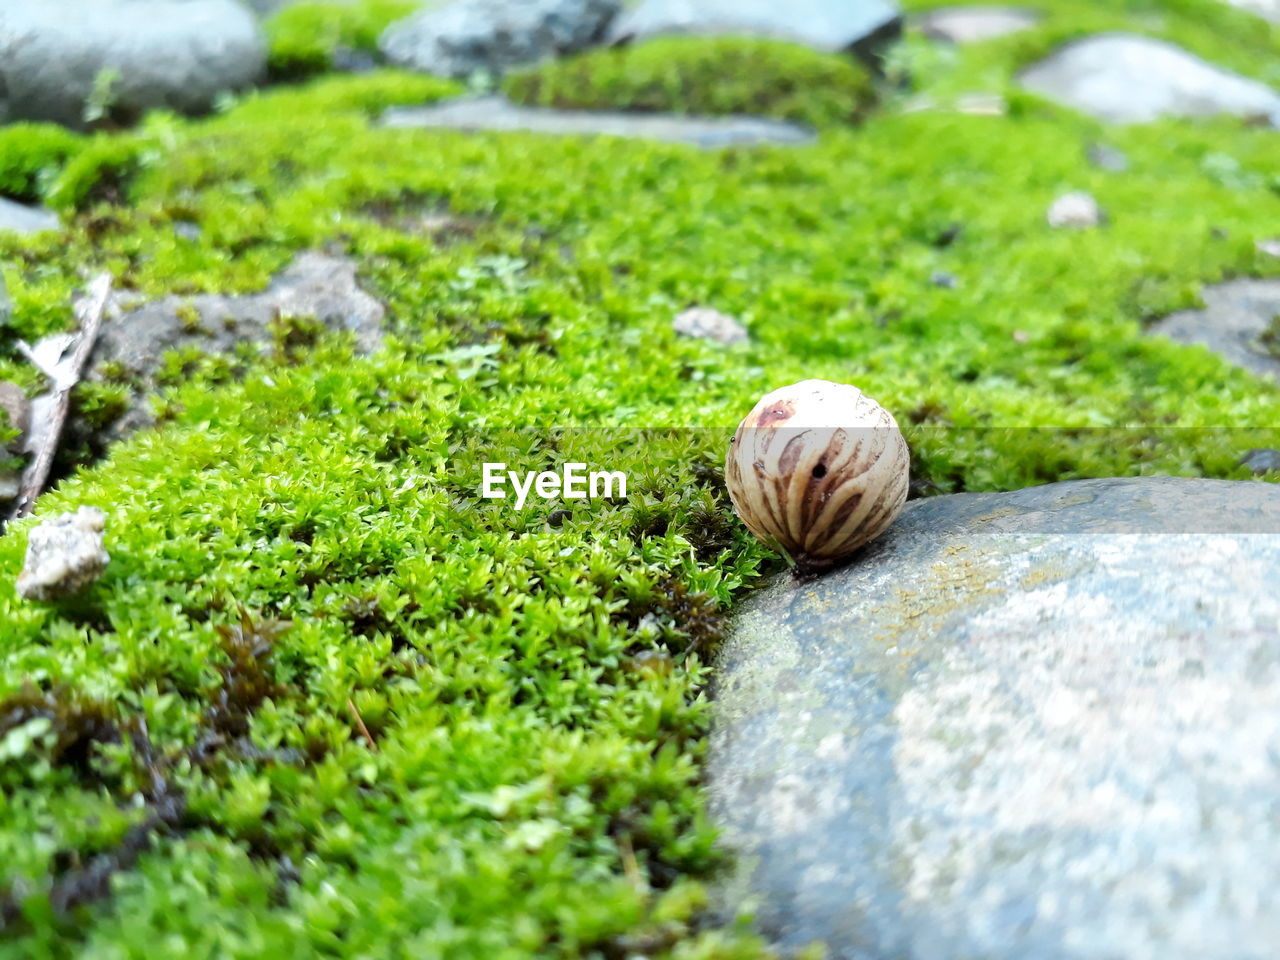 CLOSE-UP SURFACE LEVEL OF SNAIL ON MOSS